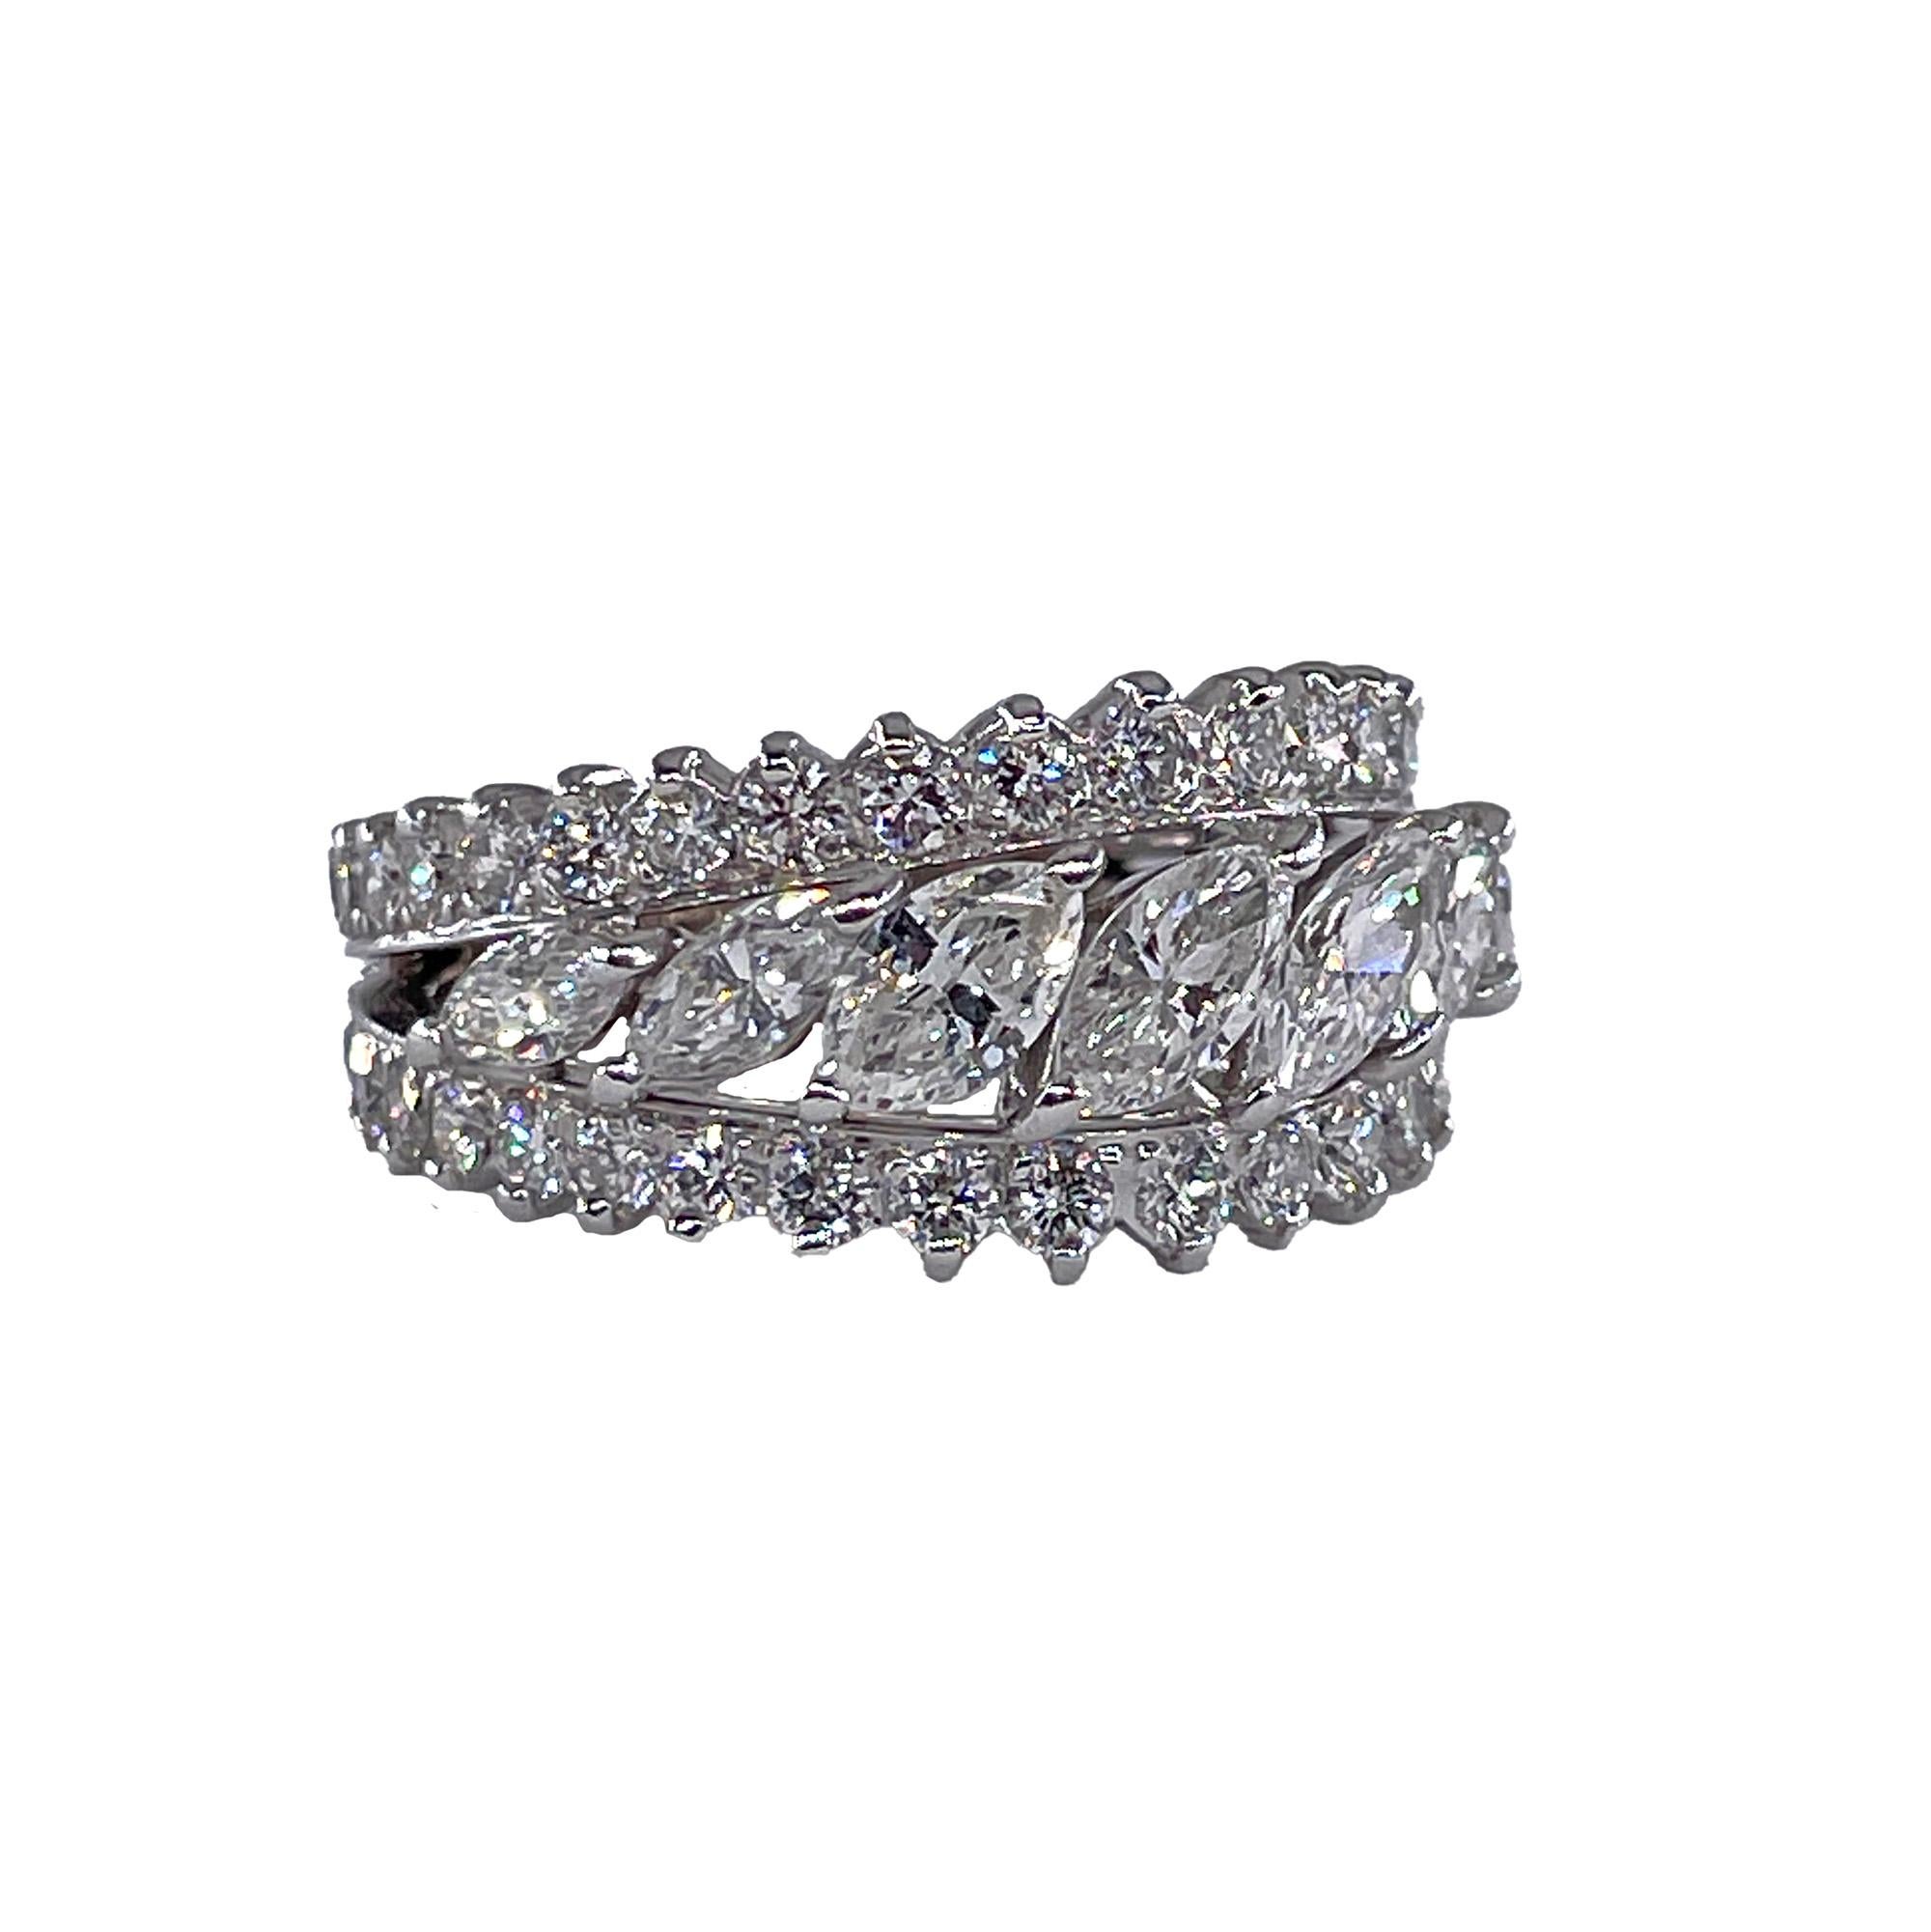 Vintage 6.89ctw Marquise Round Natural Diamond  Eternity Band Engagement Wedding Platinum Ring, Circa 1960s

Step into the 60s Glamour and away from the traditional eternity band style. This dramatic and dynamic, uniquely Fabulous Mid-Century